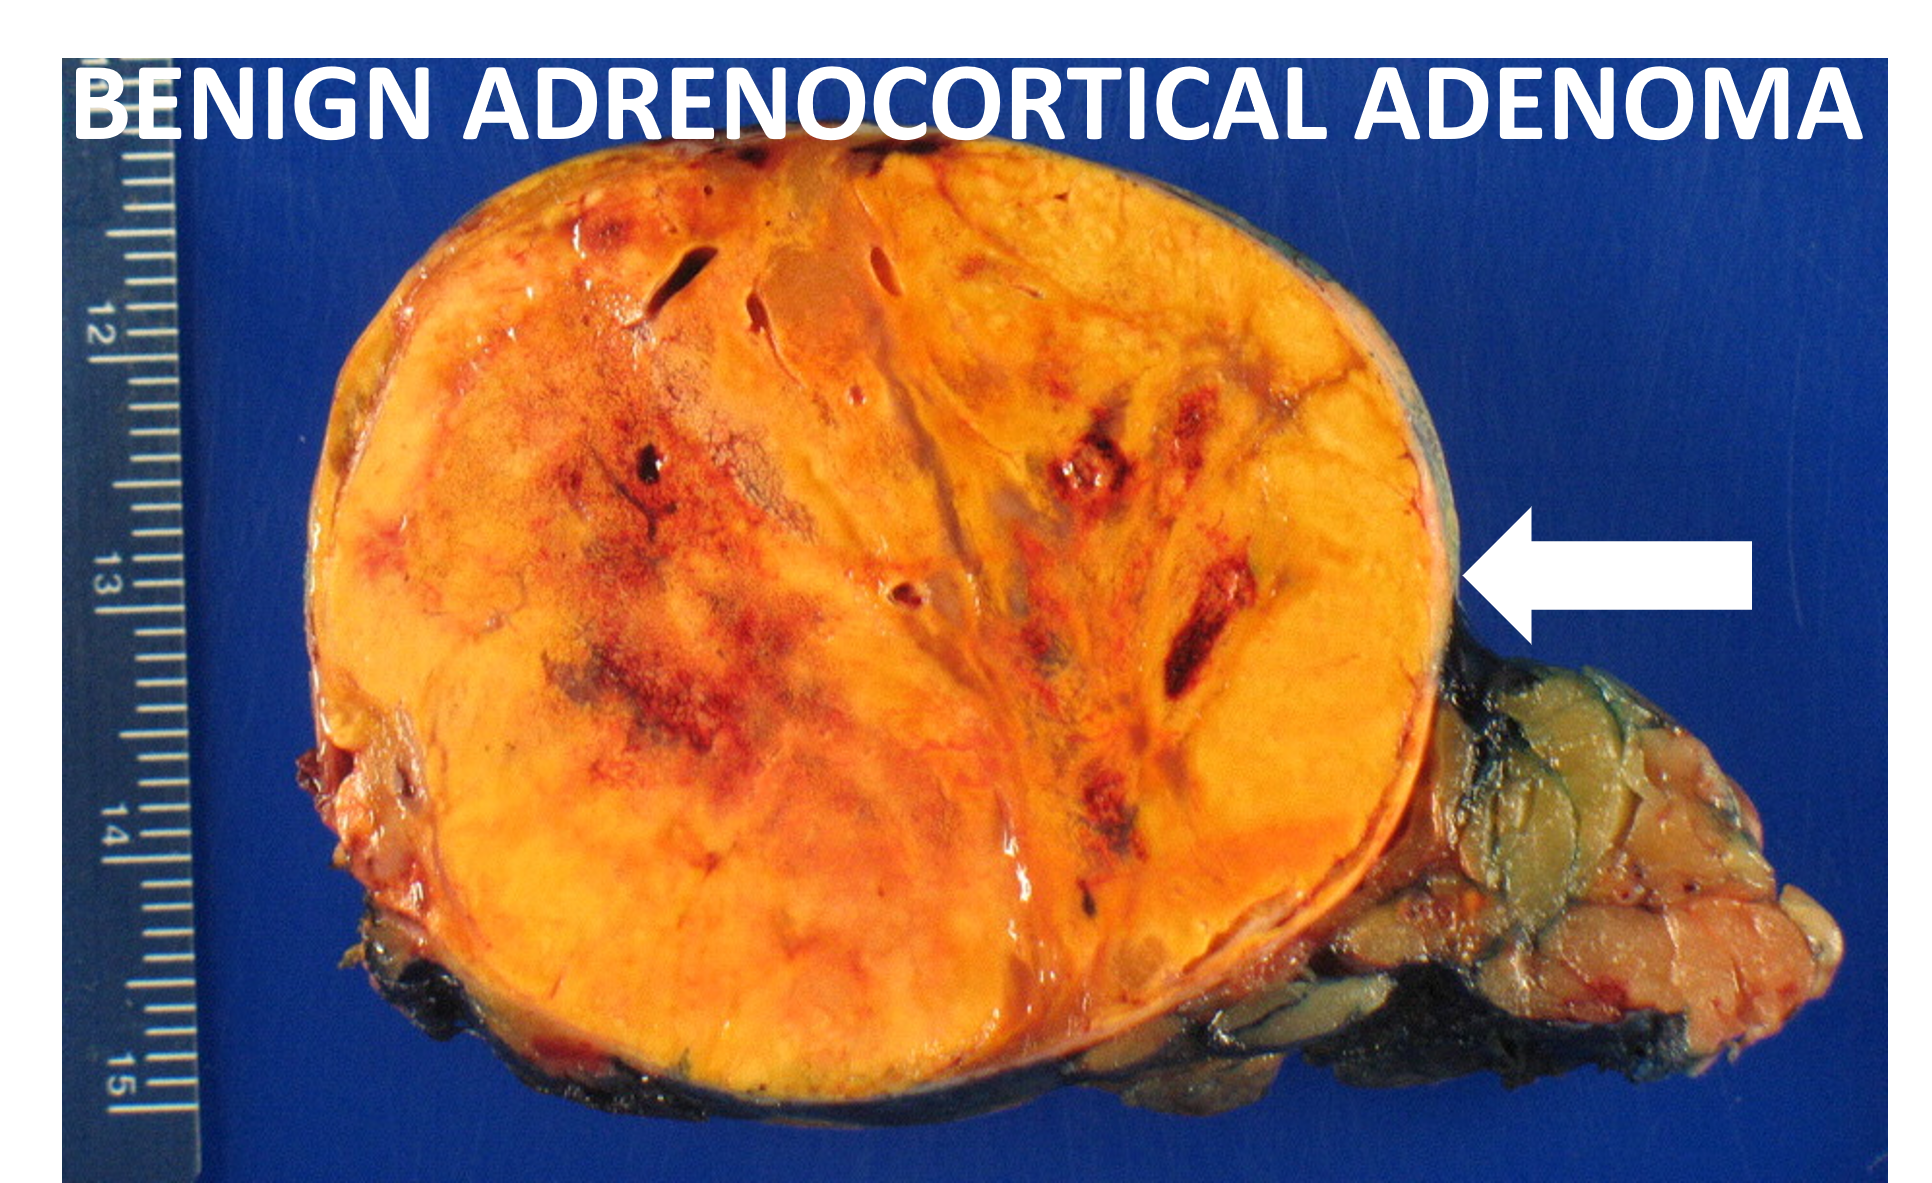 Gross pathology of a typical adrenal adenoma (arrow). It has a typical yellow-orange color. This tumor caused Cushing’s syndrome (too much cortisol).